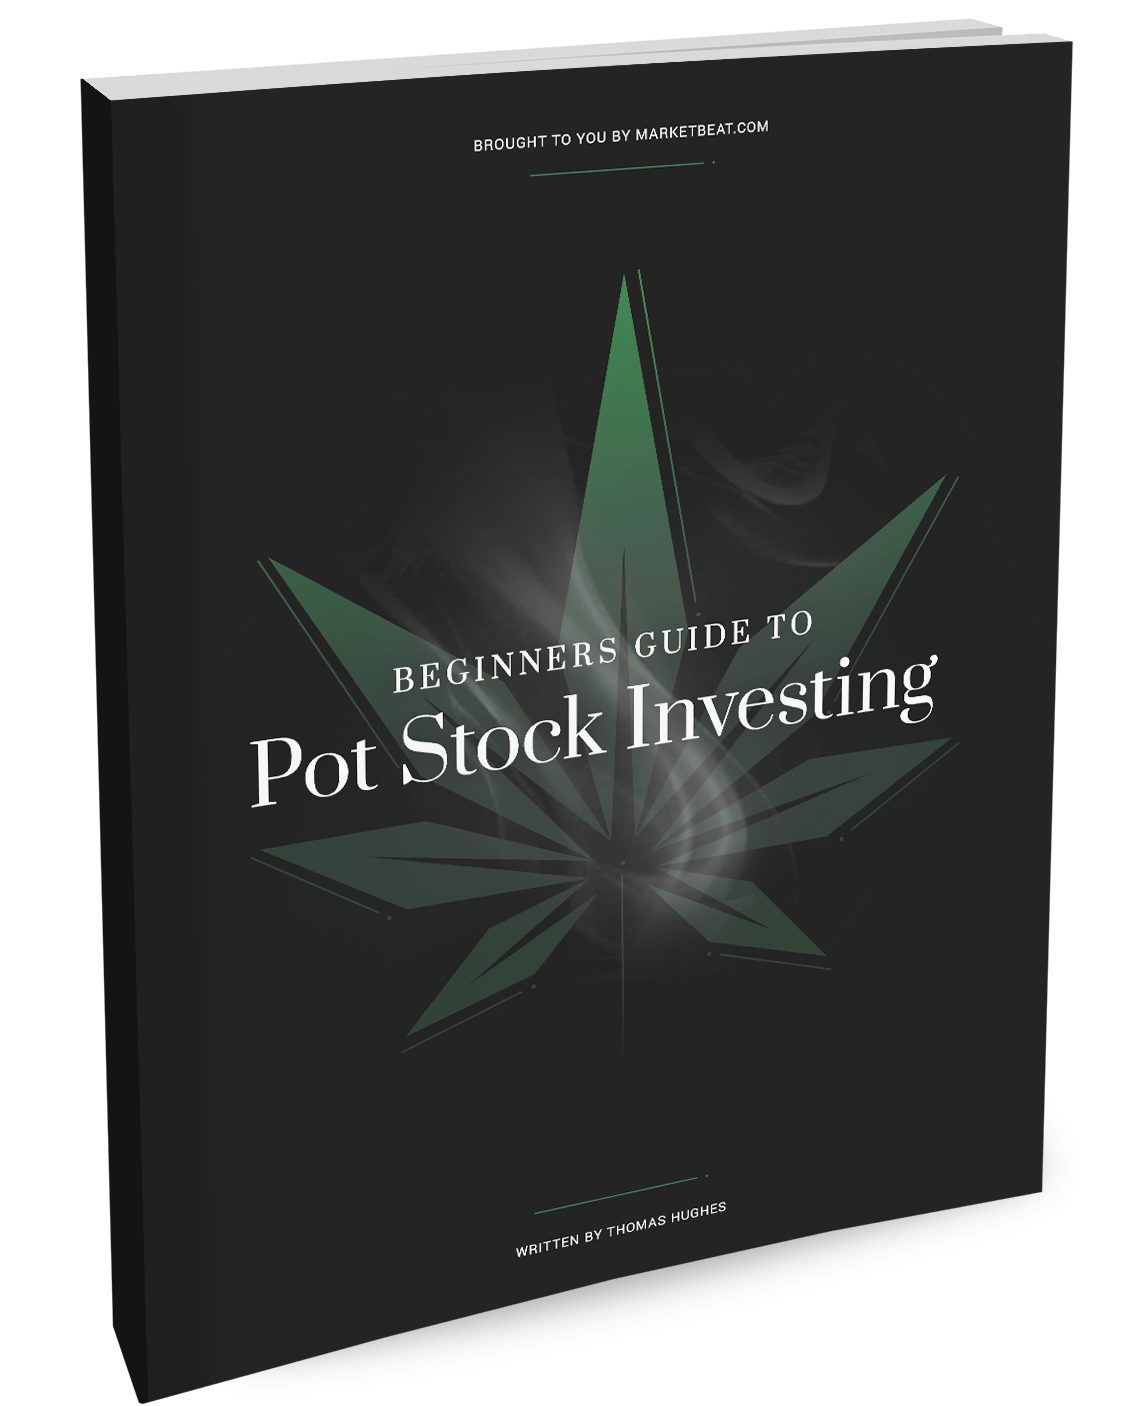 A Beginner's Guide to Covering Pot Stock Investments